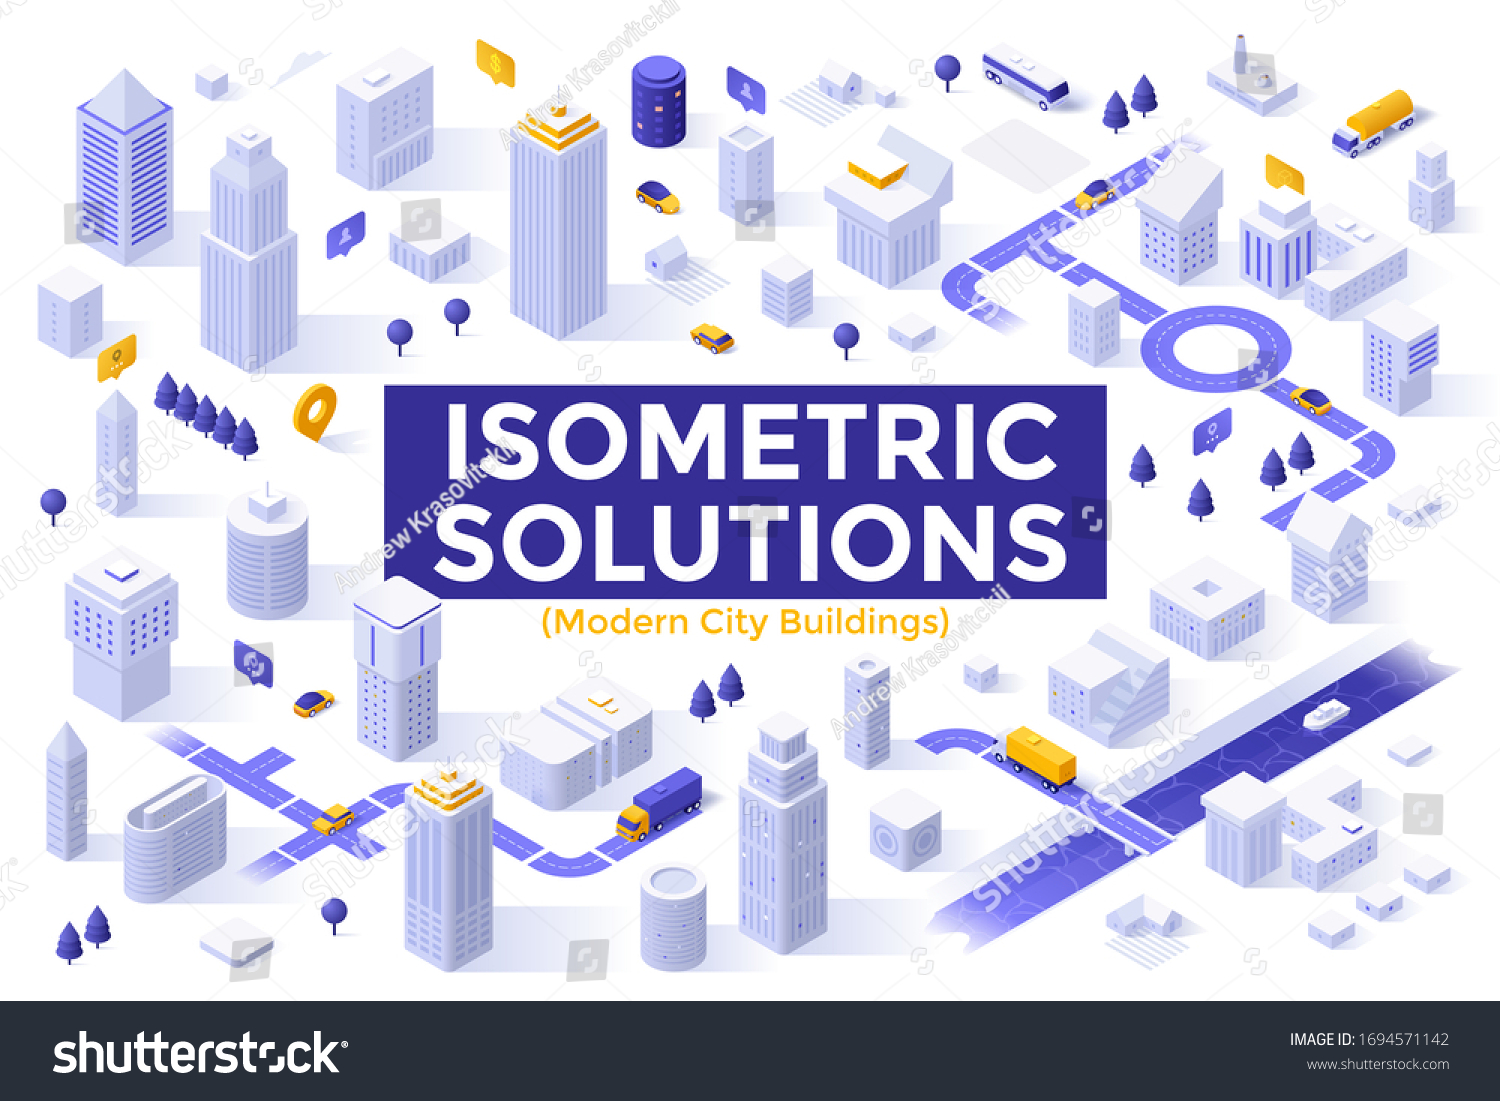 Bundle of megapolis city buildings, downtown skyscrapers, suburban houses. Set of isometric design elements or objects isolated on white background. Modern vector illustration for map construction.